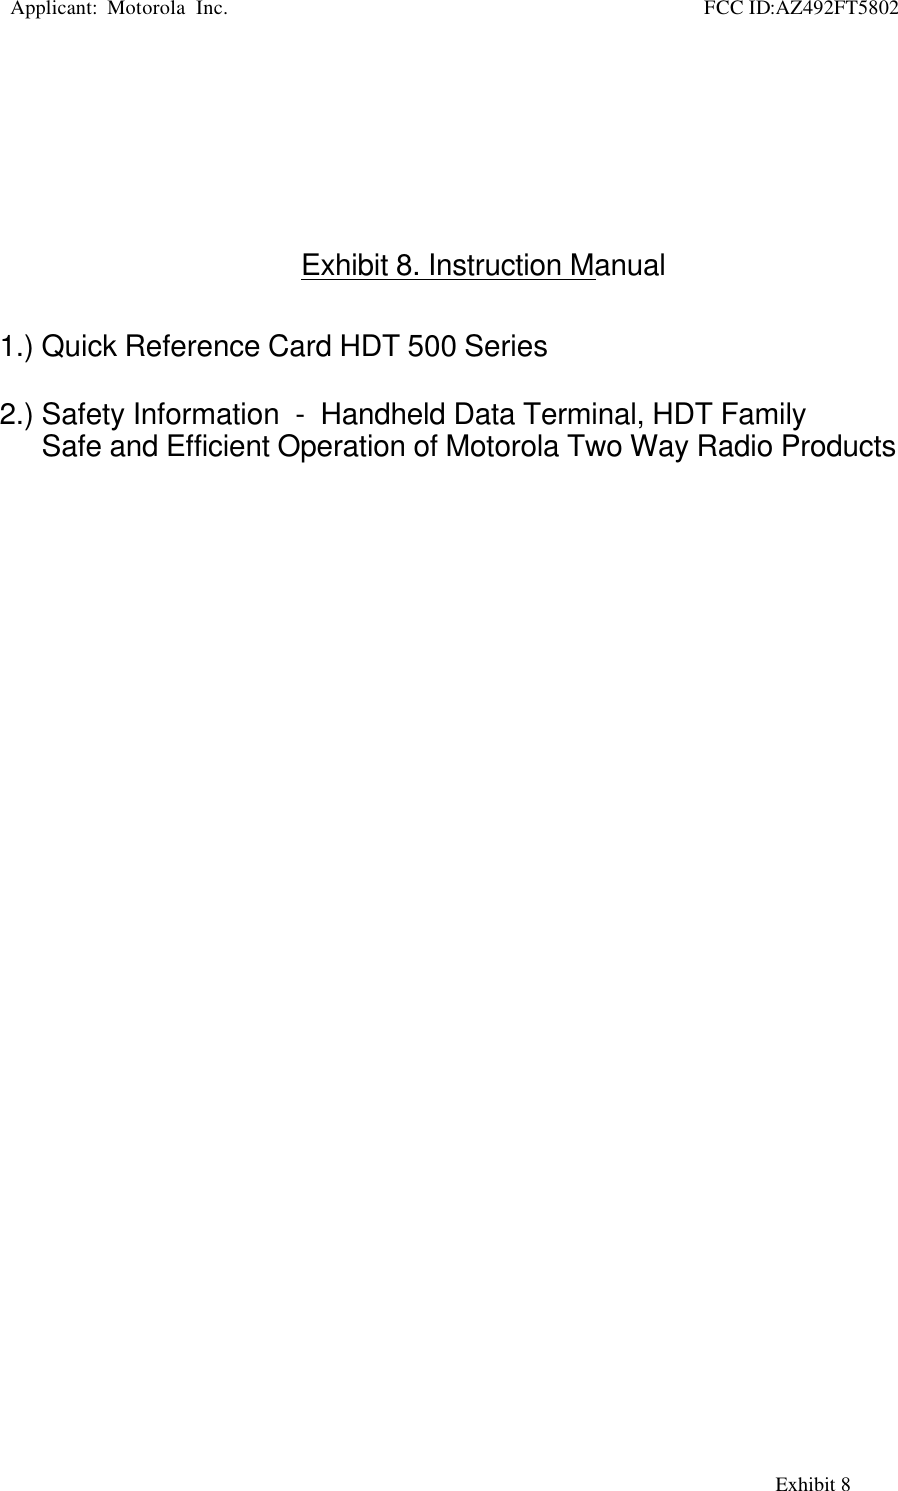   Applicant:  Motorola  Inc.                                                     FCC ID:AZ492FT5802                                                                                                                                                     Exhibit 8Exhibit 8. Instruction Manual1.) Quick Reference Card HDT 500 Series2.) Safety Information  -  Handheld Data Terminal, HDT FamilySafe and Efficient Operation of Motorola Two Way Radio Products